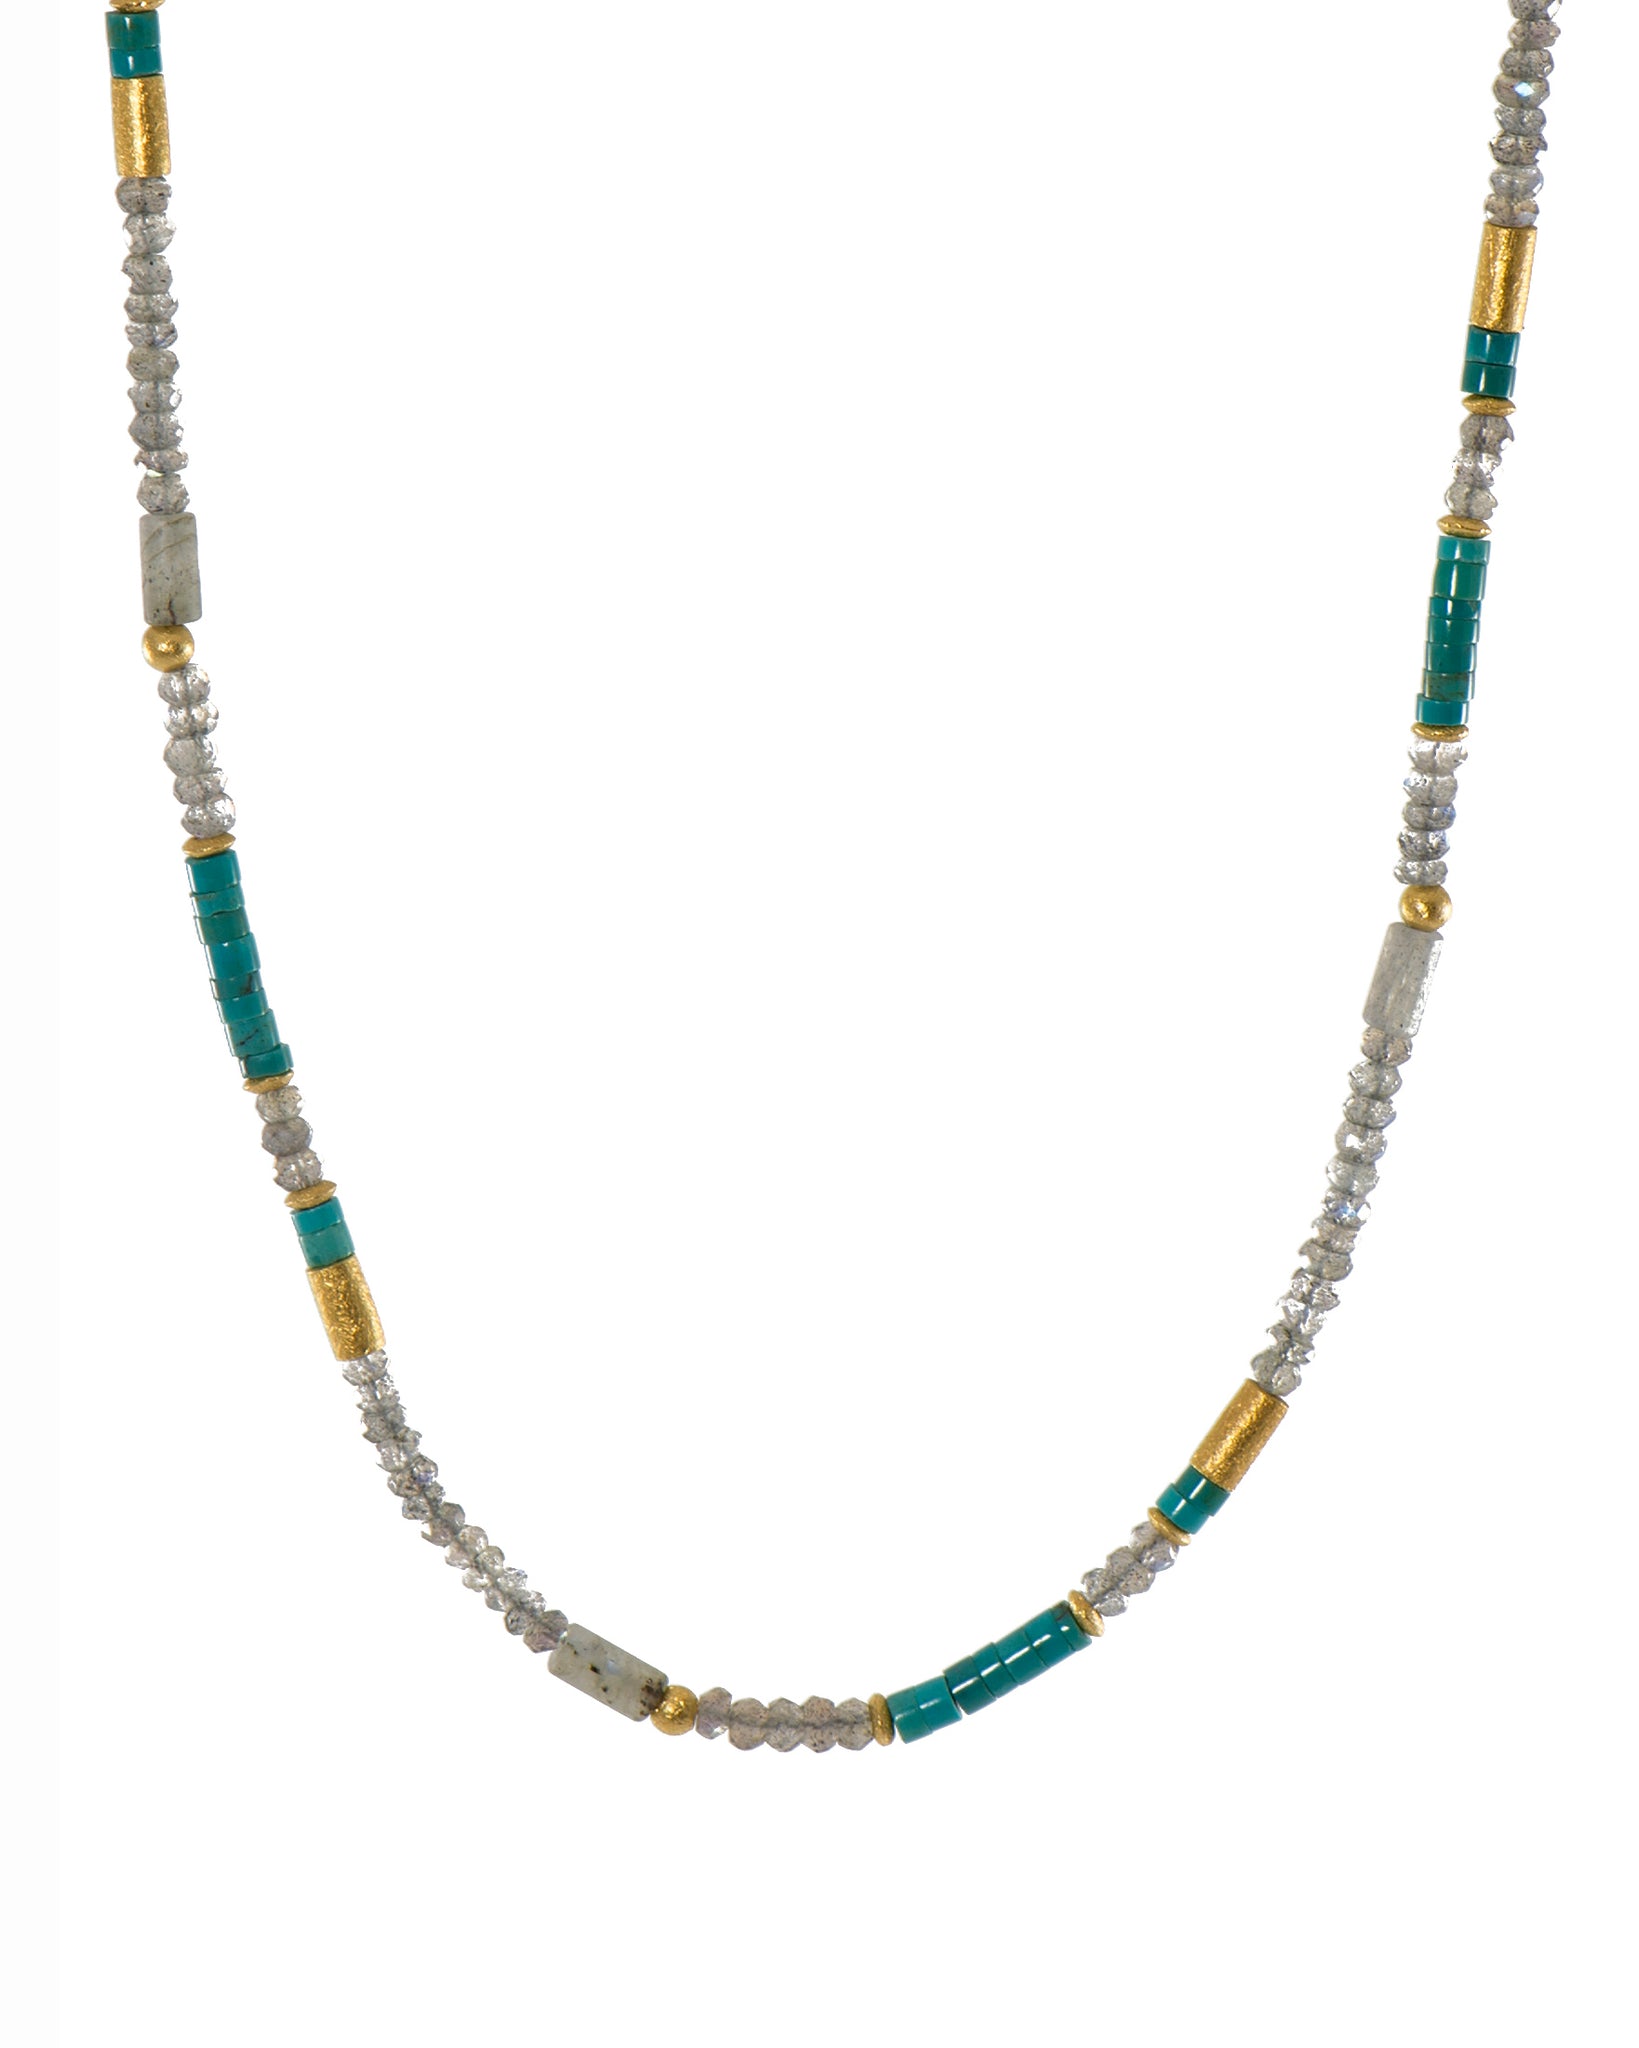 Labradorite and Turquoise Necklace 3MM 24K Fair Trade Gold Vermeil